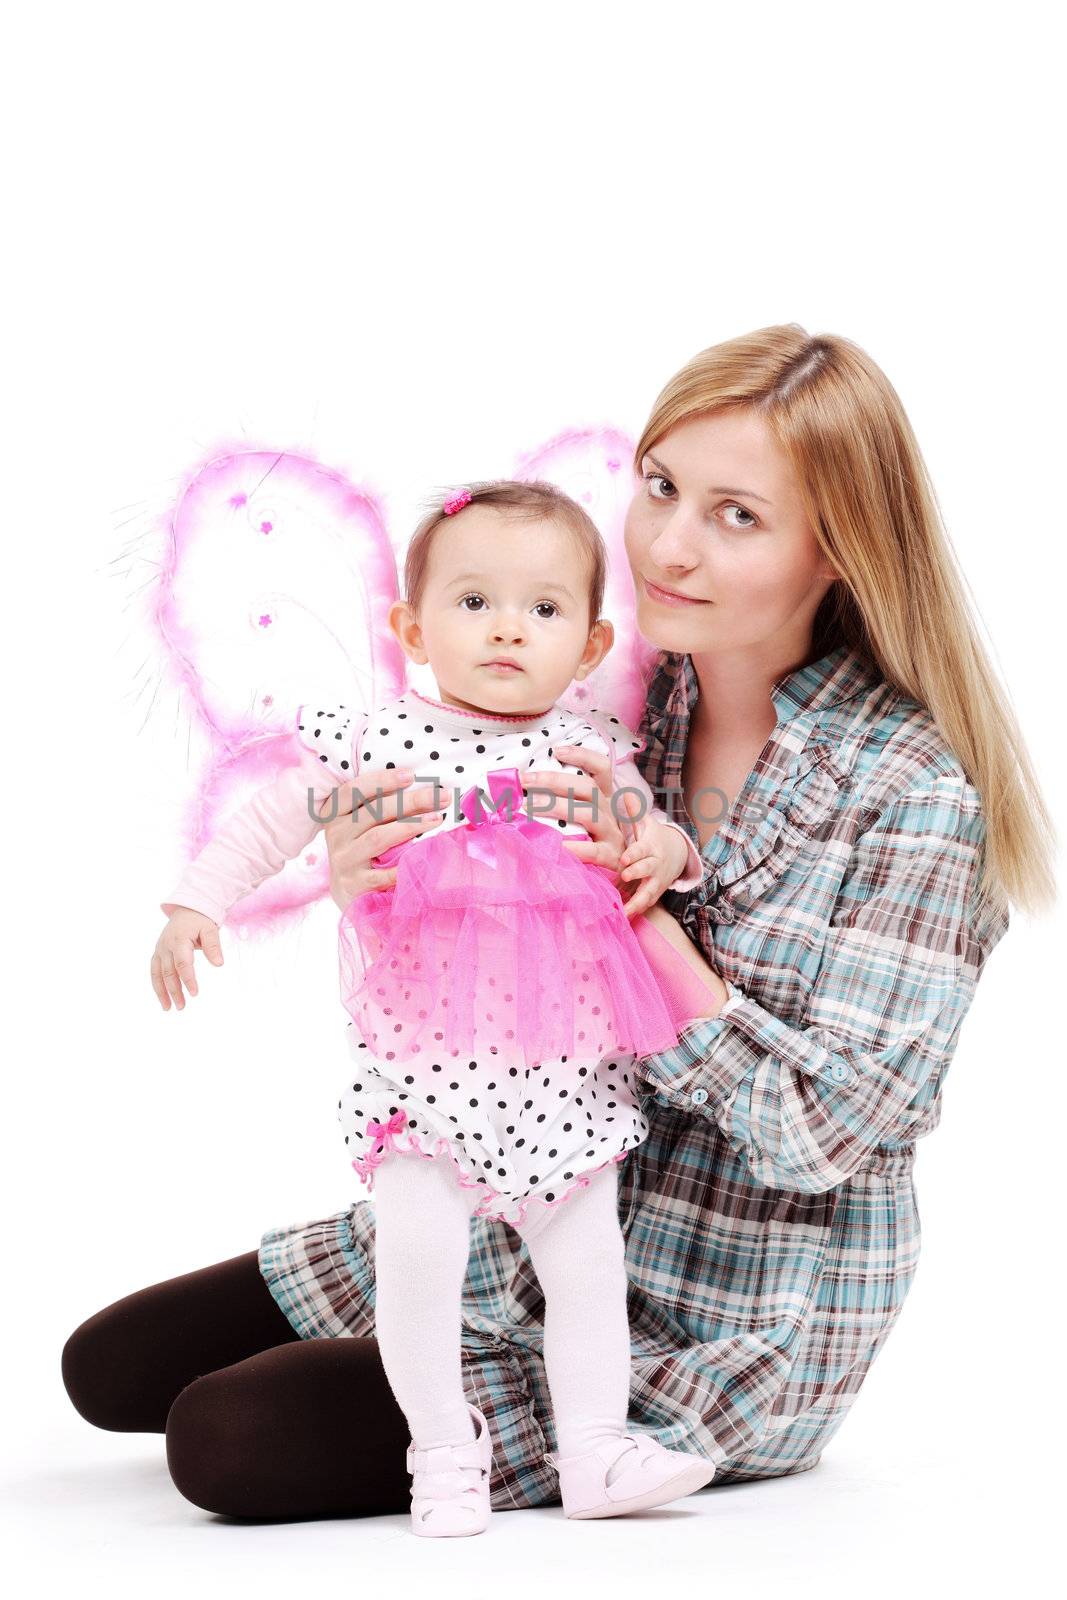 mother with her baby girl in pink butterfly outfit